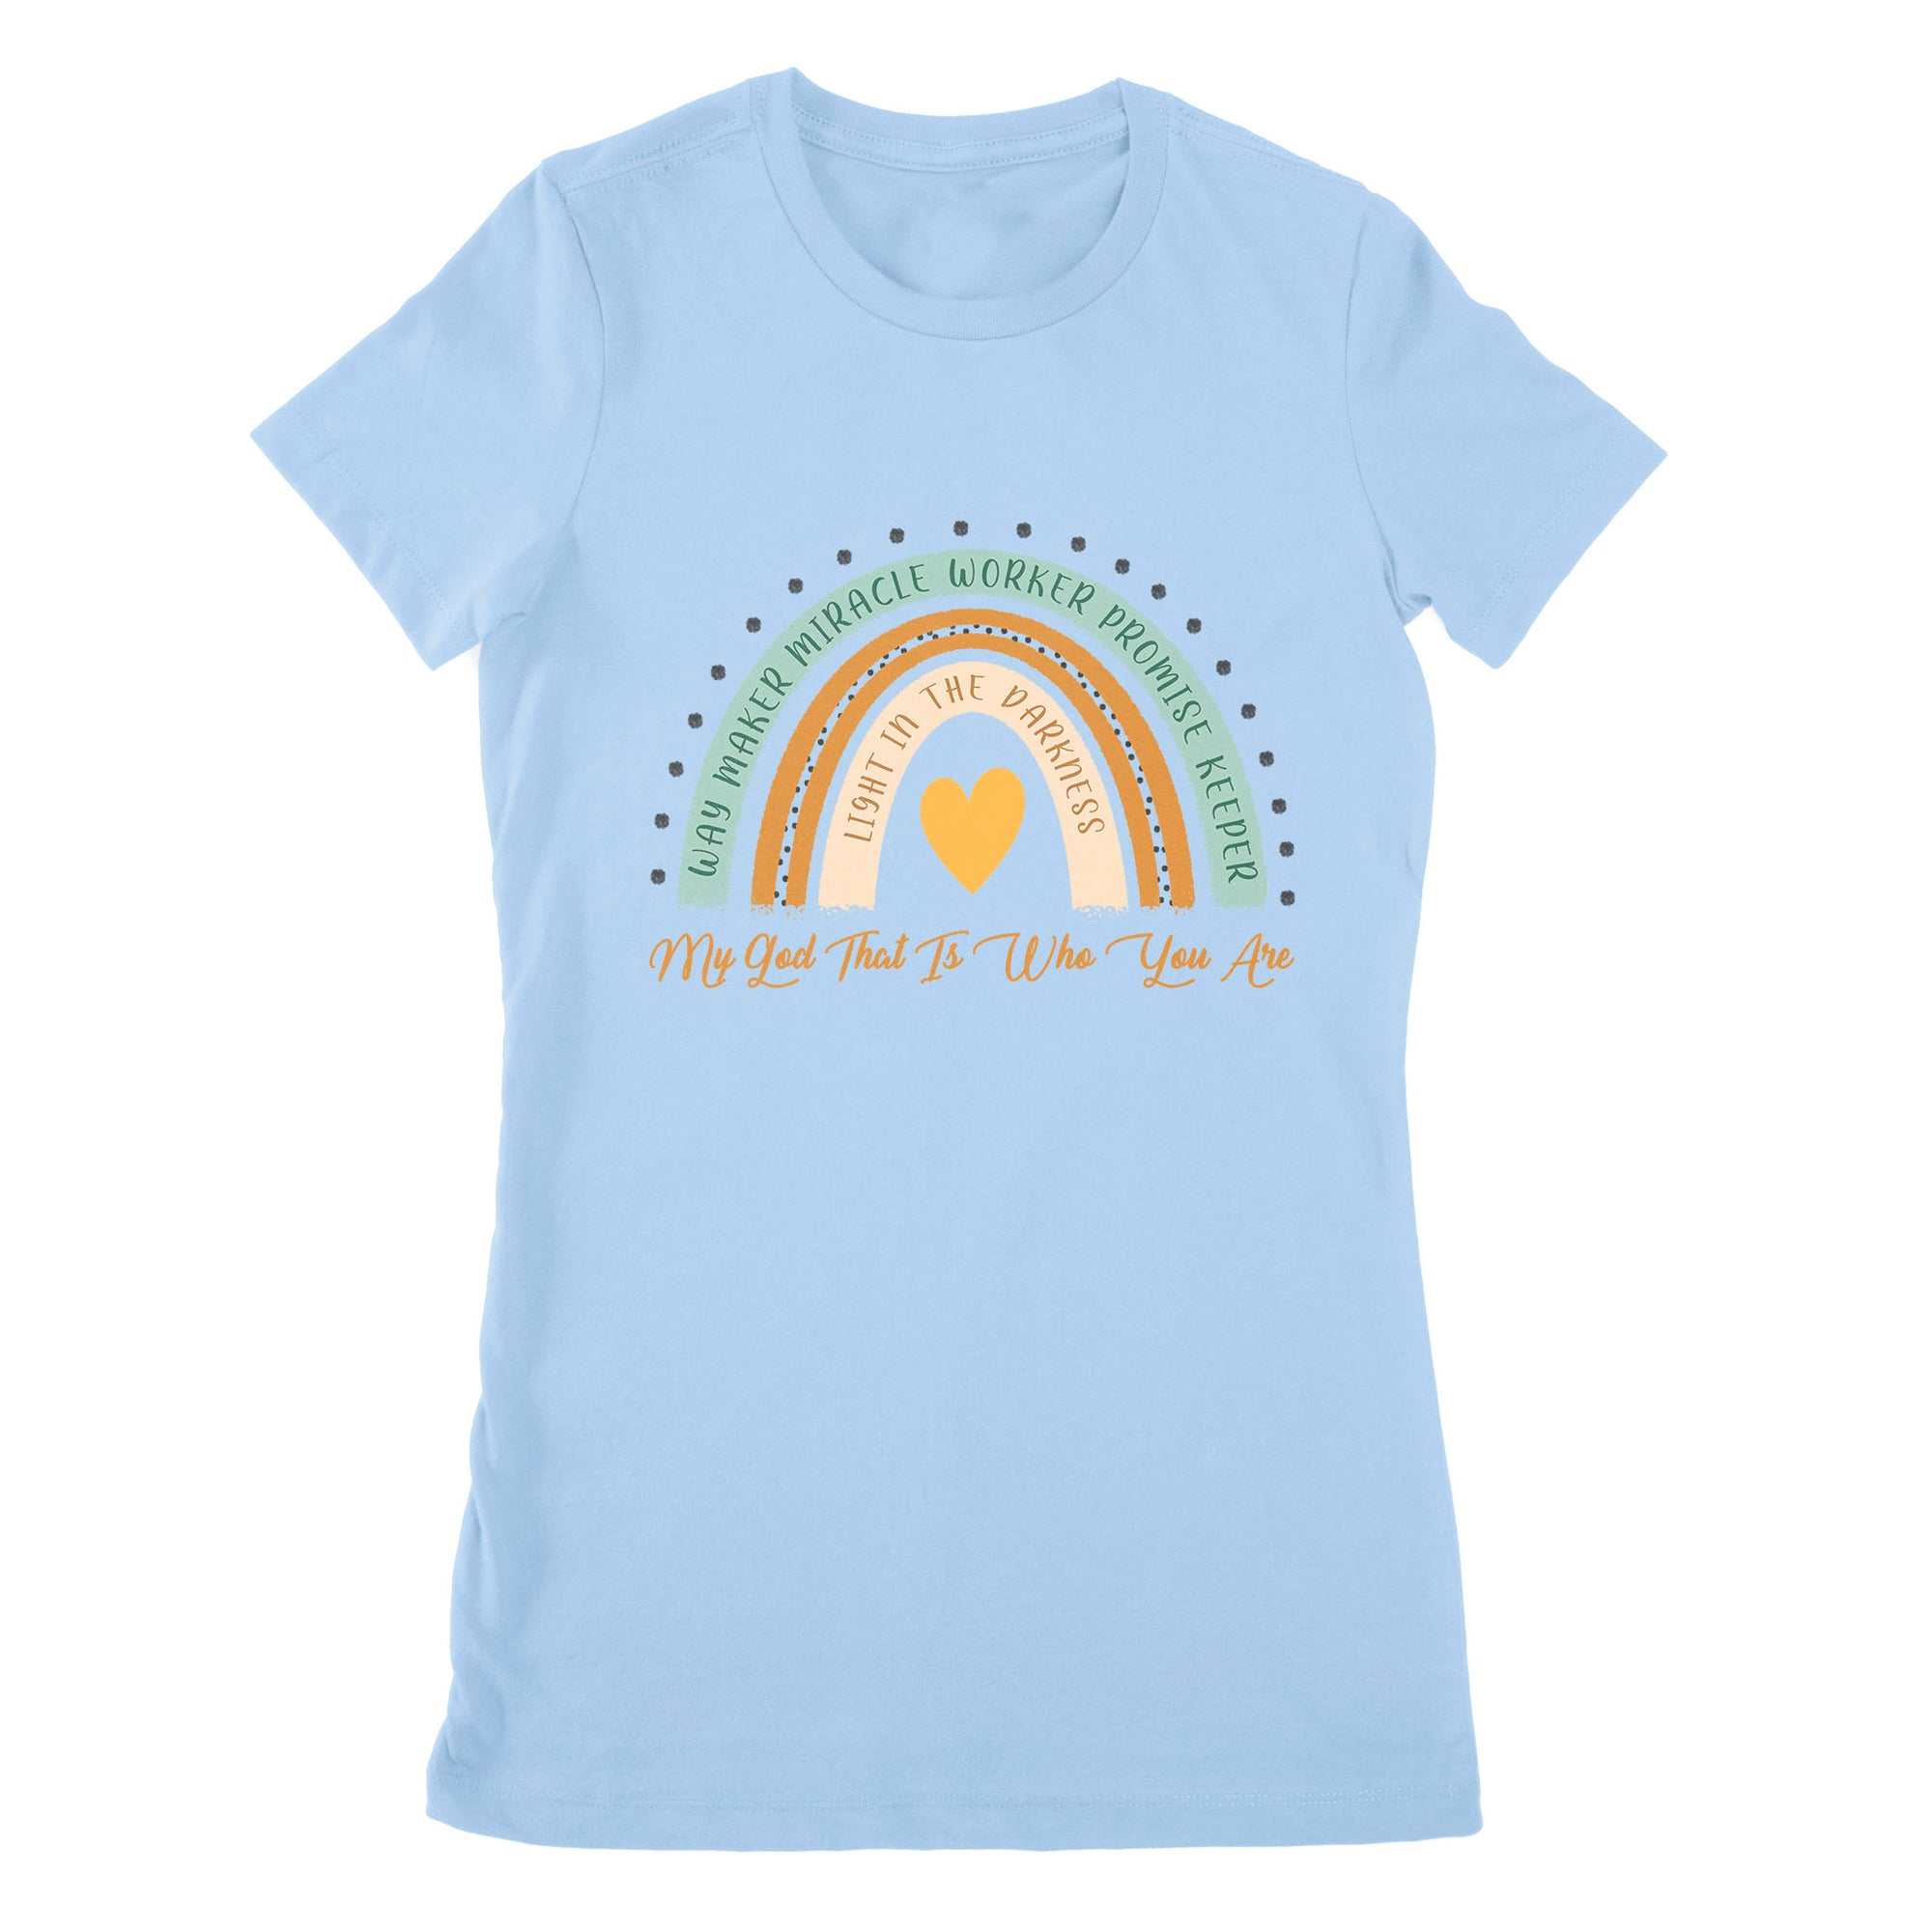 Premium Women's T-shirt - Way Maker Miracle Worker Promise Keeper Light In The Darkness